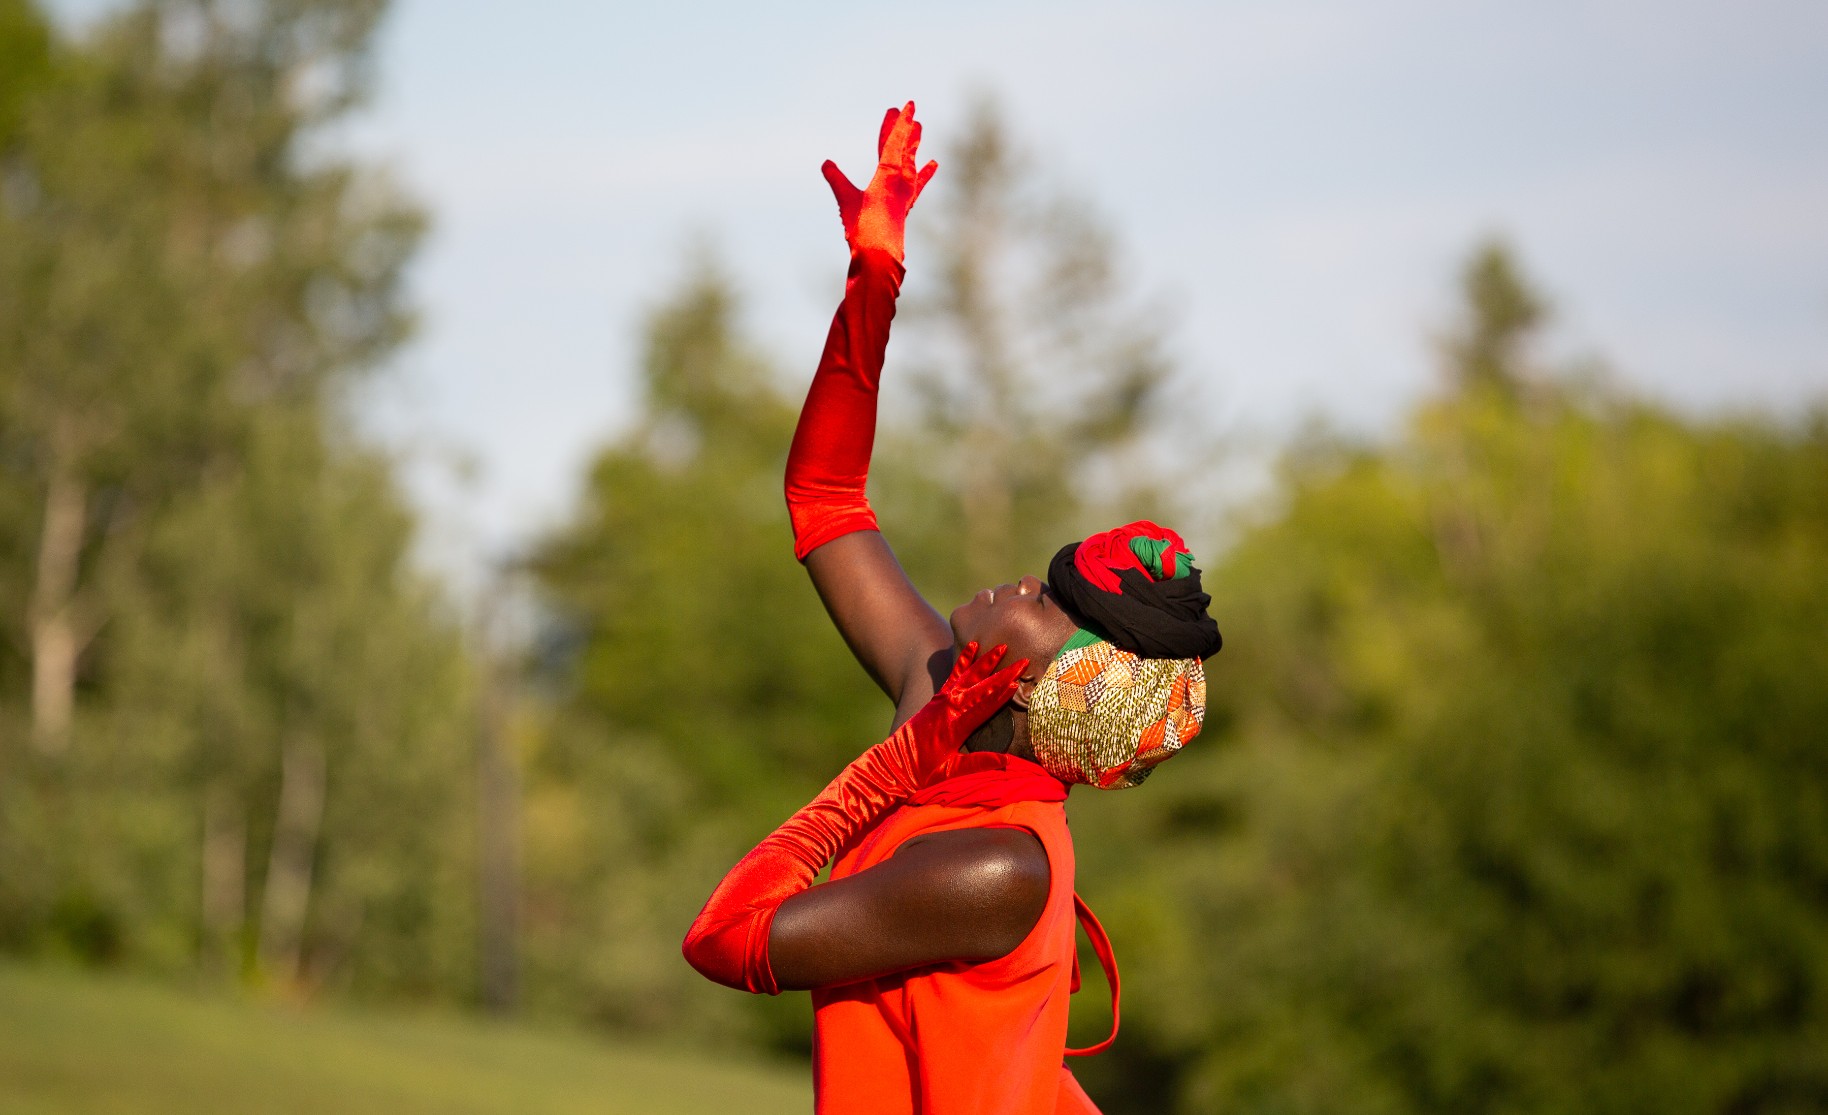 A black woman in a red dress and long red gloves reaches upwards